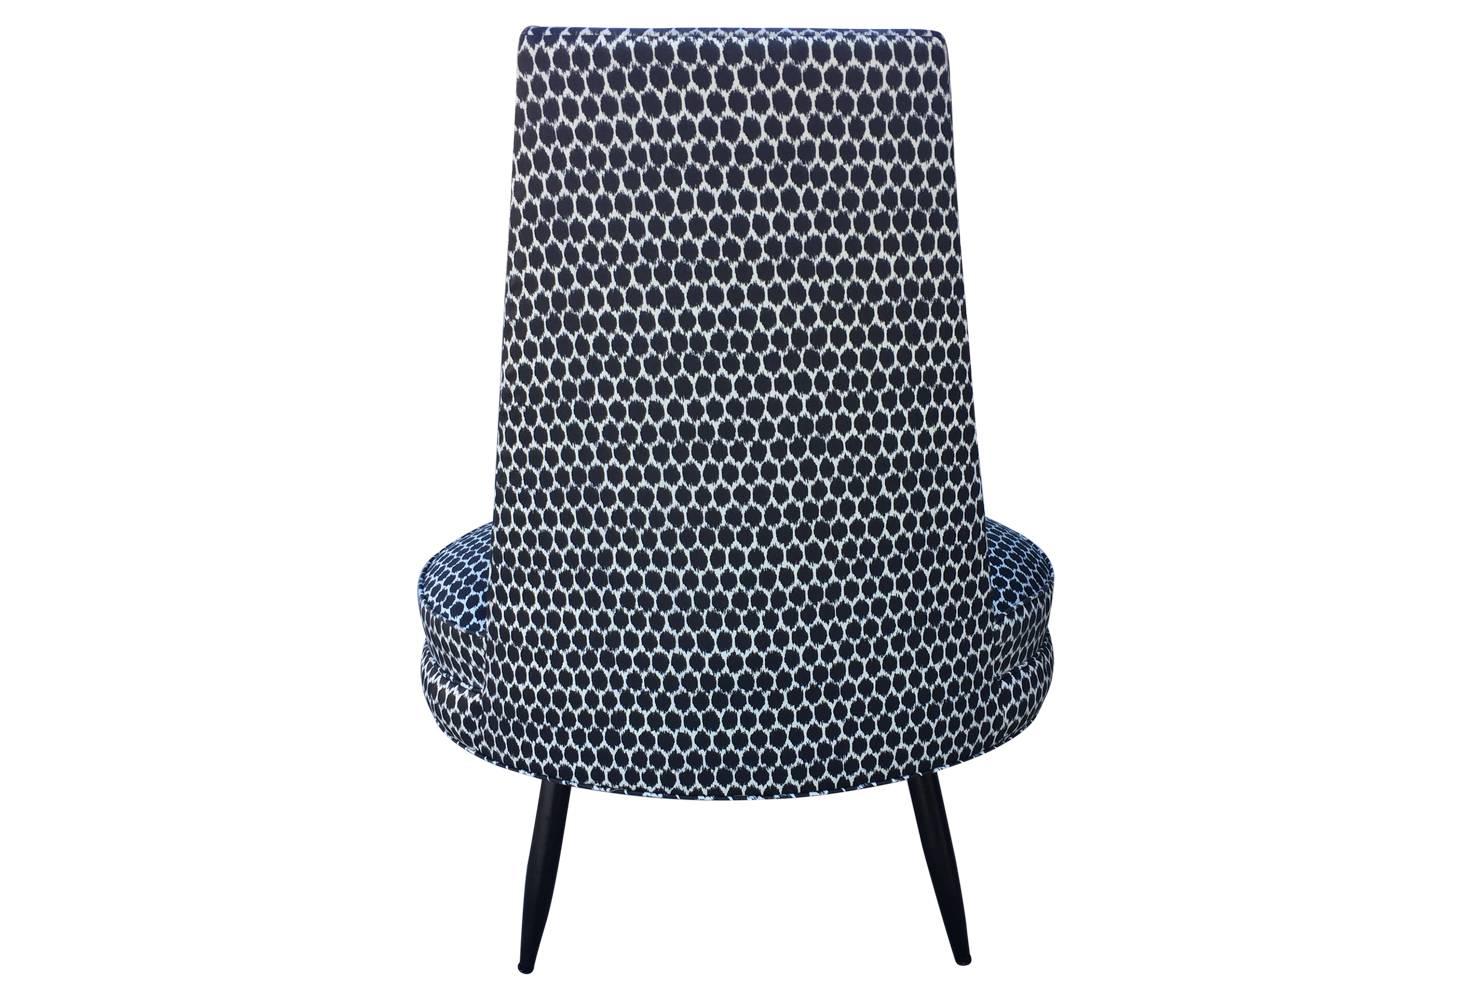 20th Century Charcoal Grey and White Ikat Polka Dot Mid-Century Modern High Back Chair